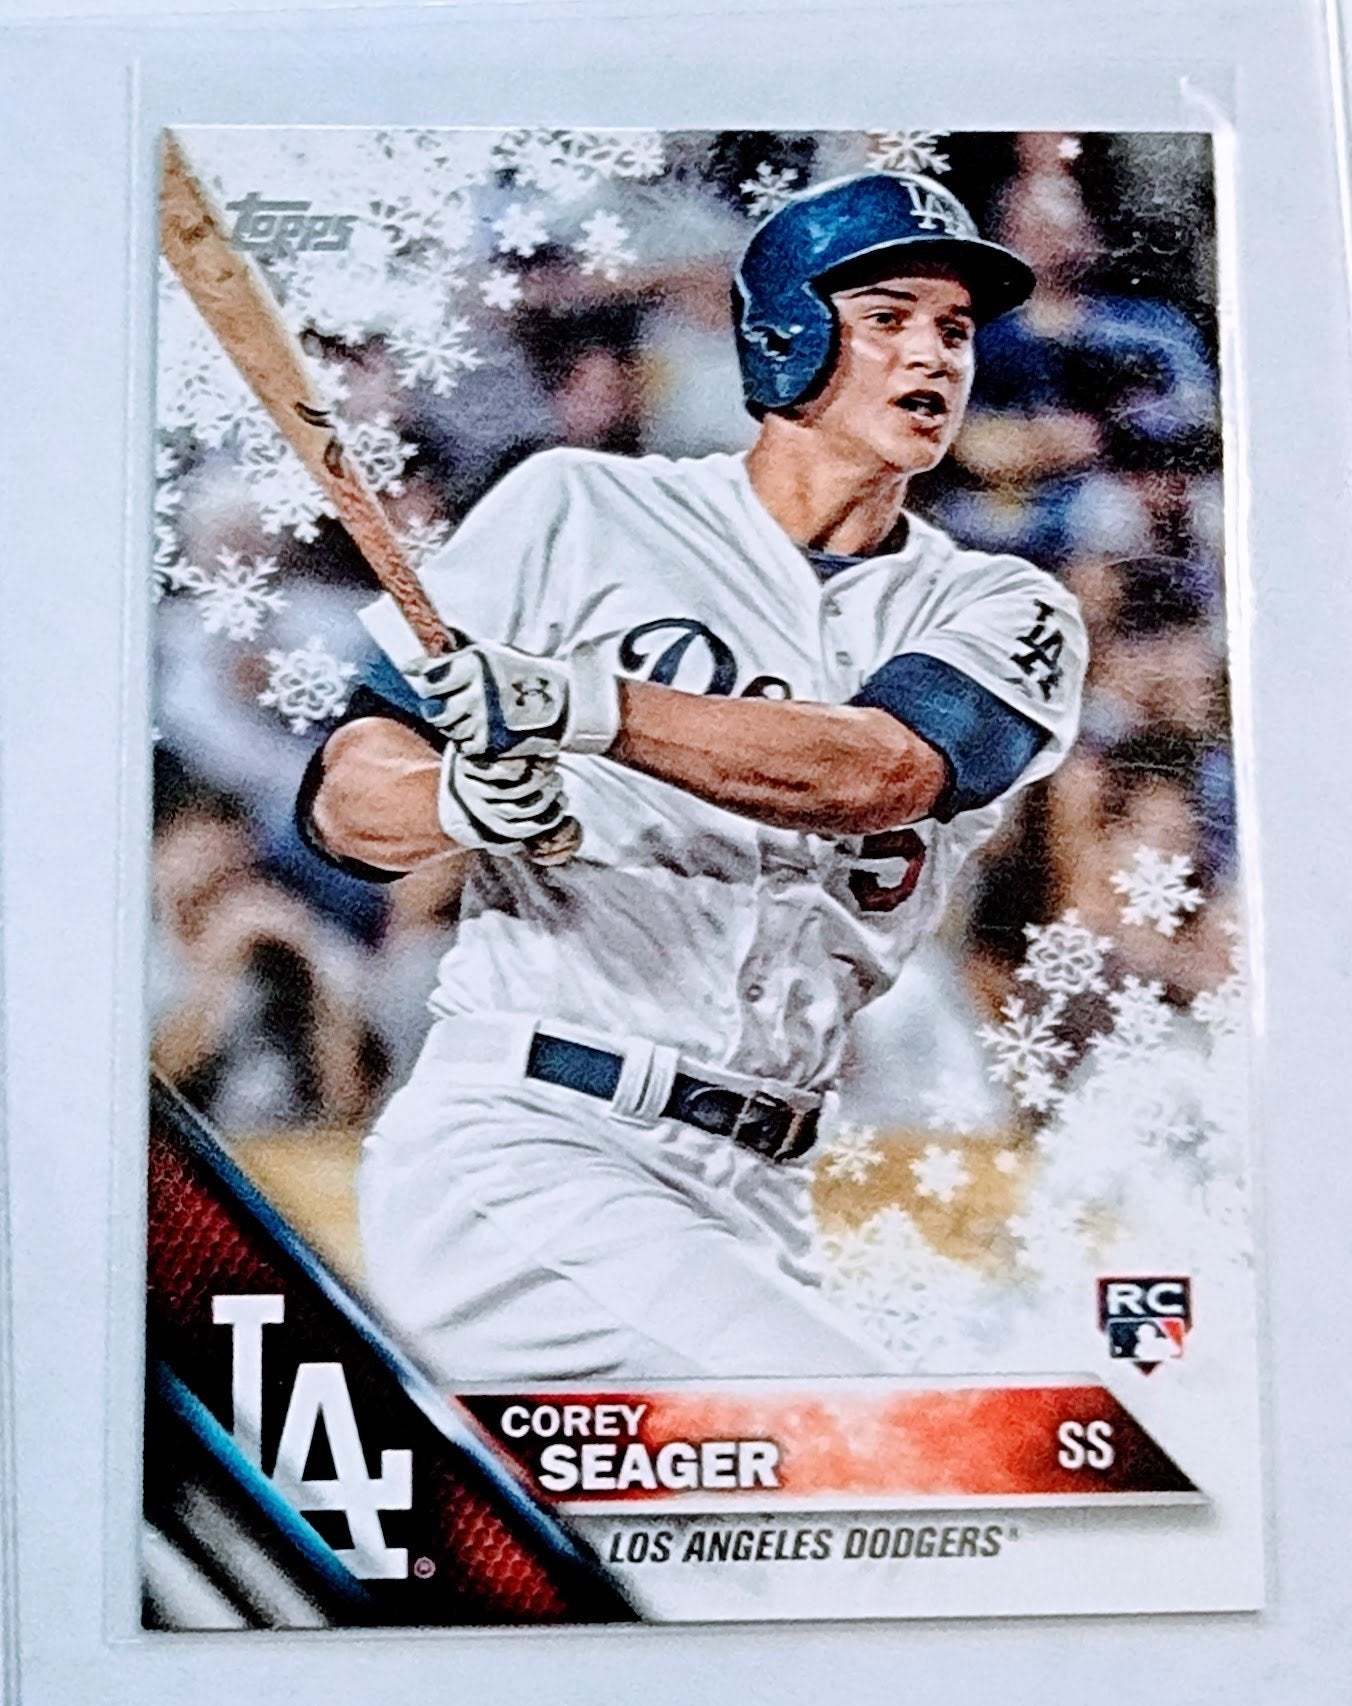 2016 Topps Holiday Corey Seager Rookie Baseball Card TPTV simple Xclusive Collectibles   